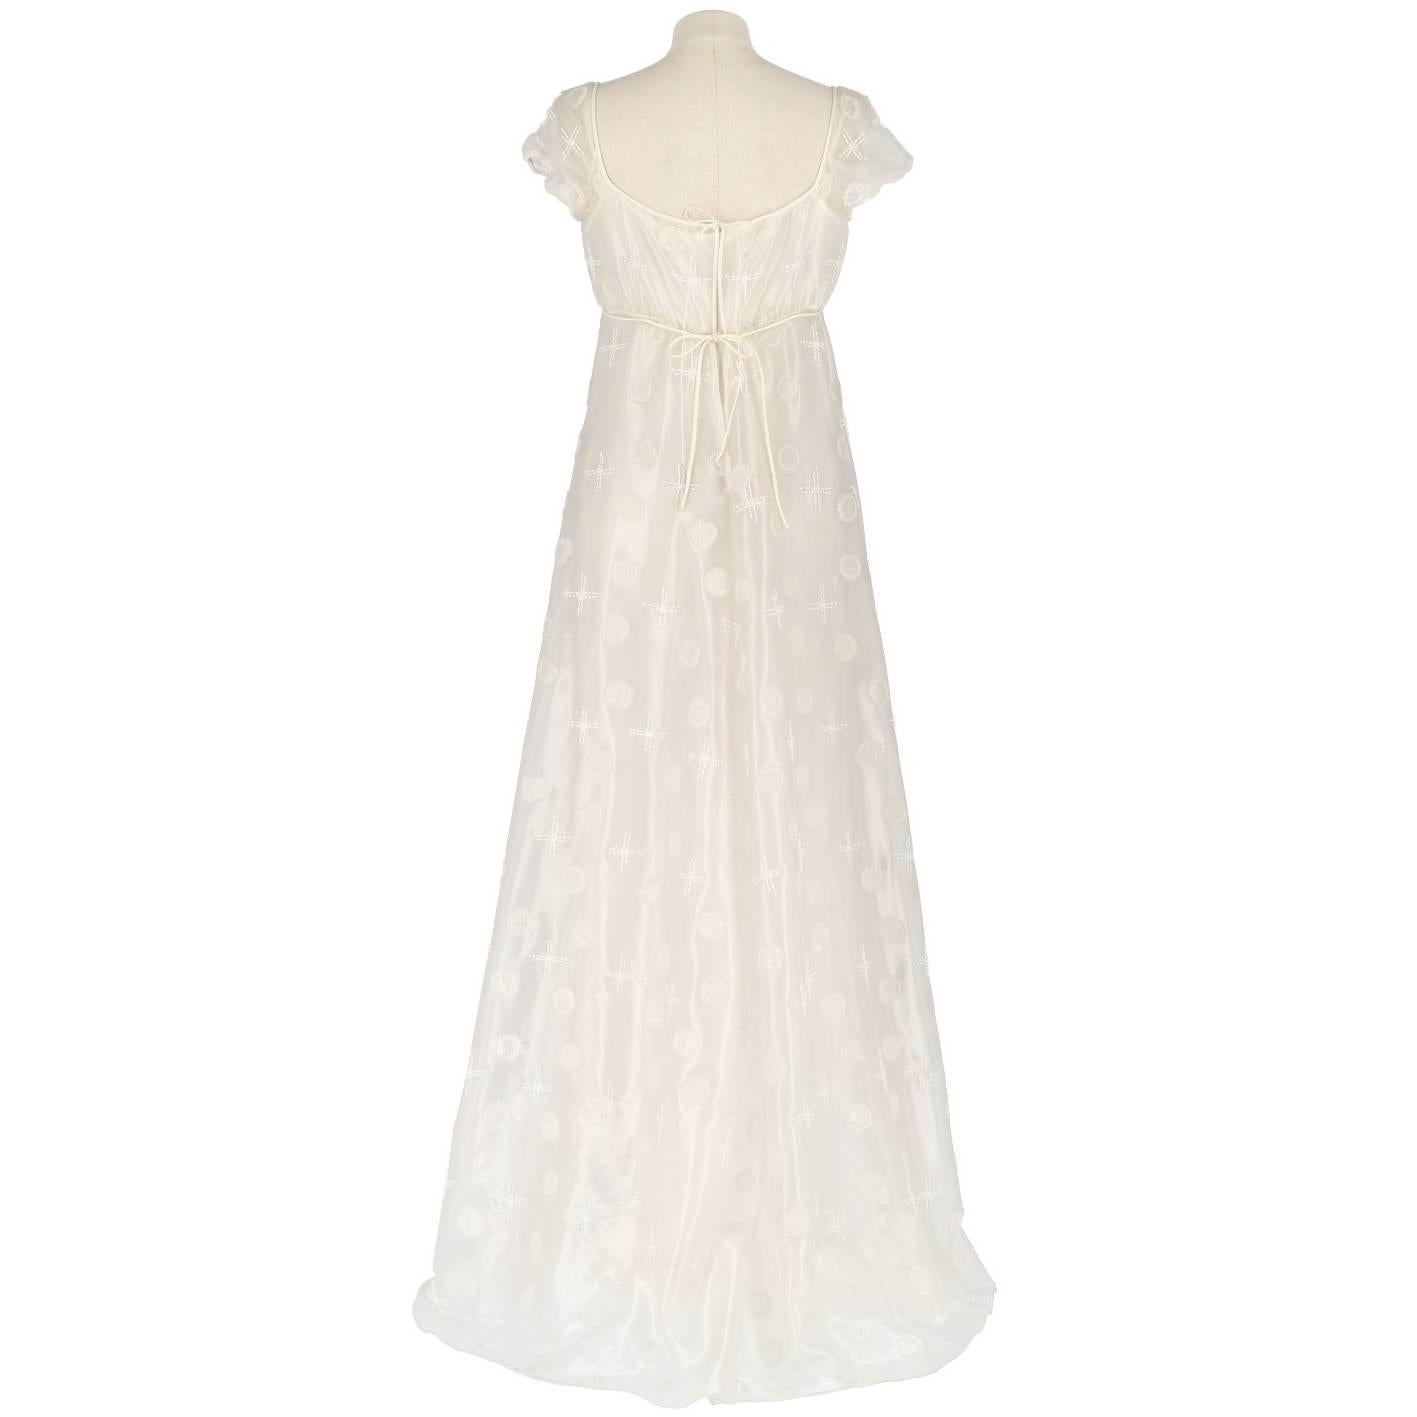 Marvelous Alberta Ferretti wedding dress decorated with white and transparent beads. The dress is hight waisted, with a white coulisse fastened on the back, and short sleeved, decorated with cross and rounds all over the dress, and includes the slip